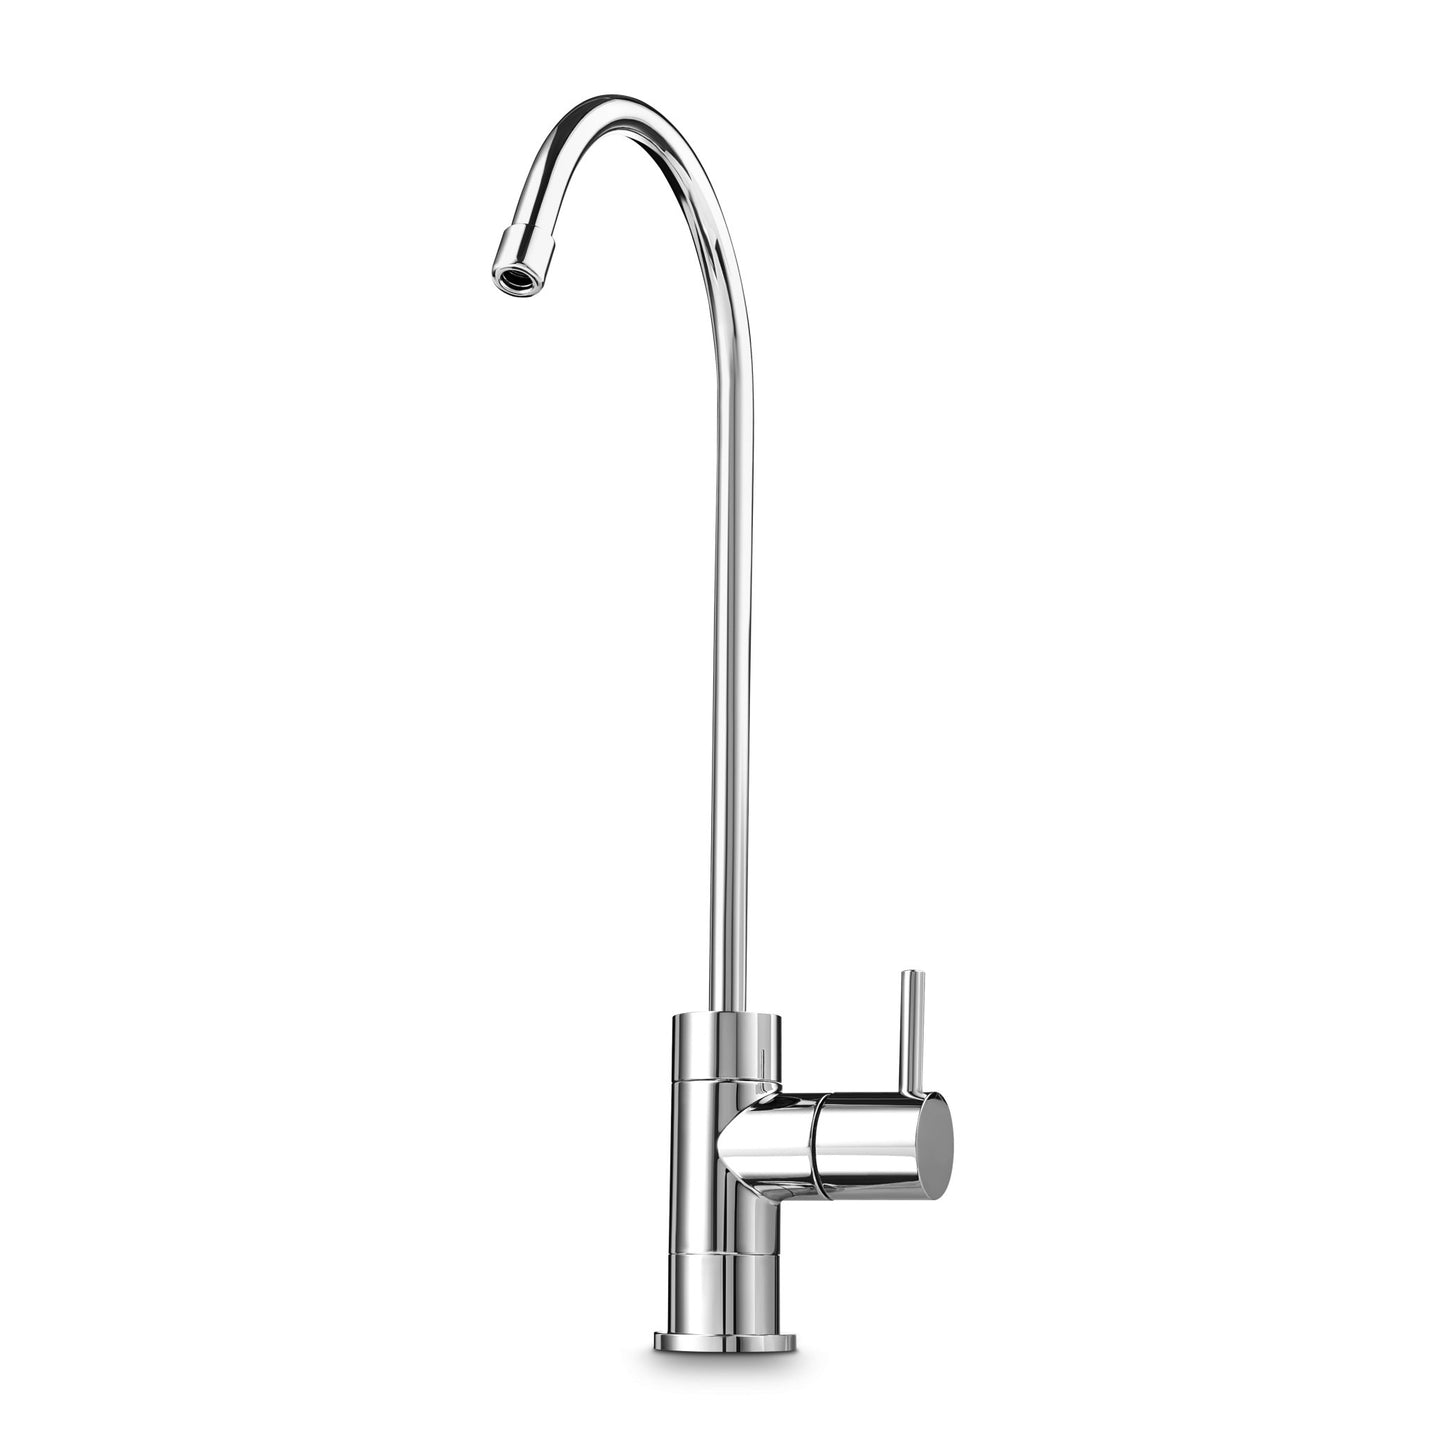 RKIN Flash Undersink Reverse Osmosis System with Chrome Lead-Free Faucet - RKIN